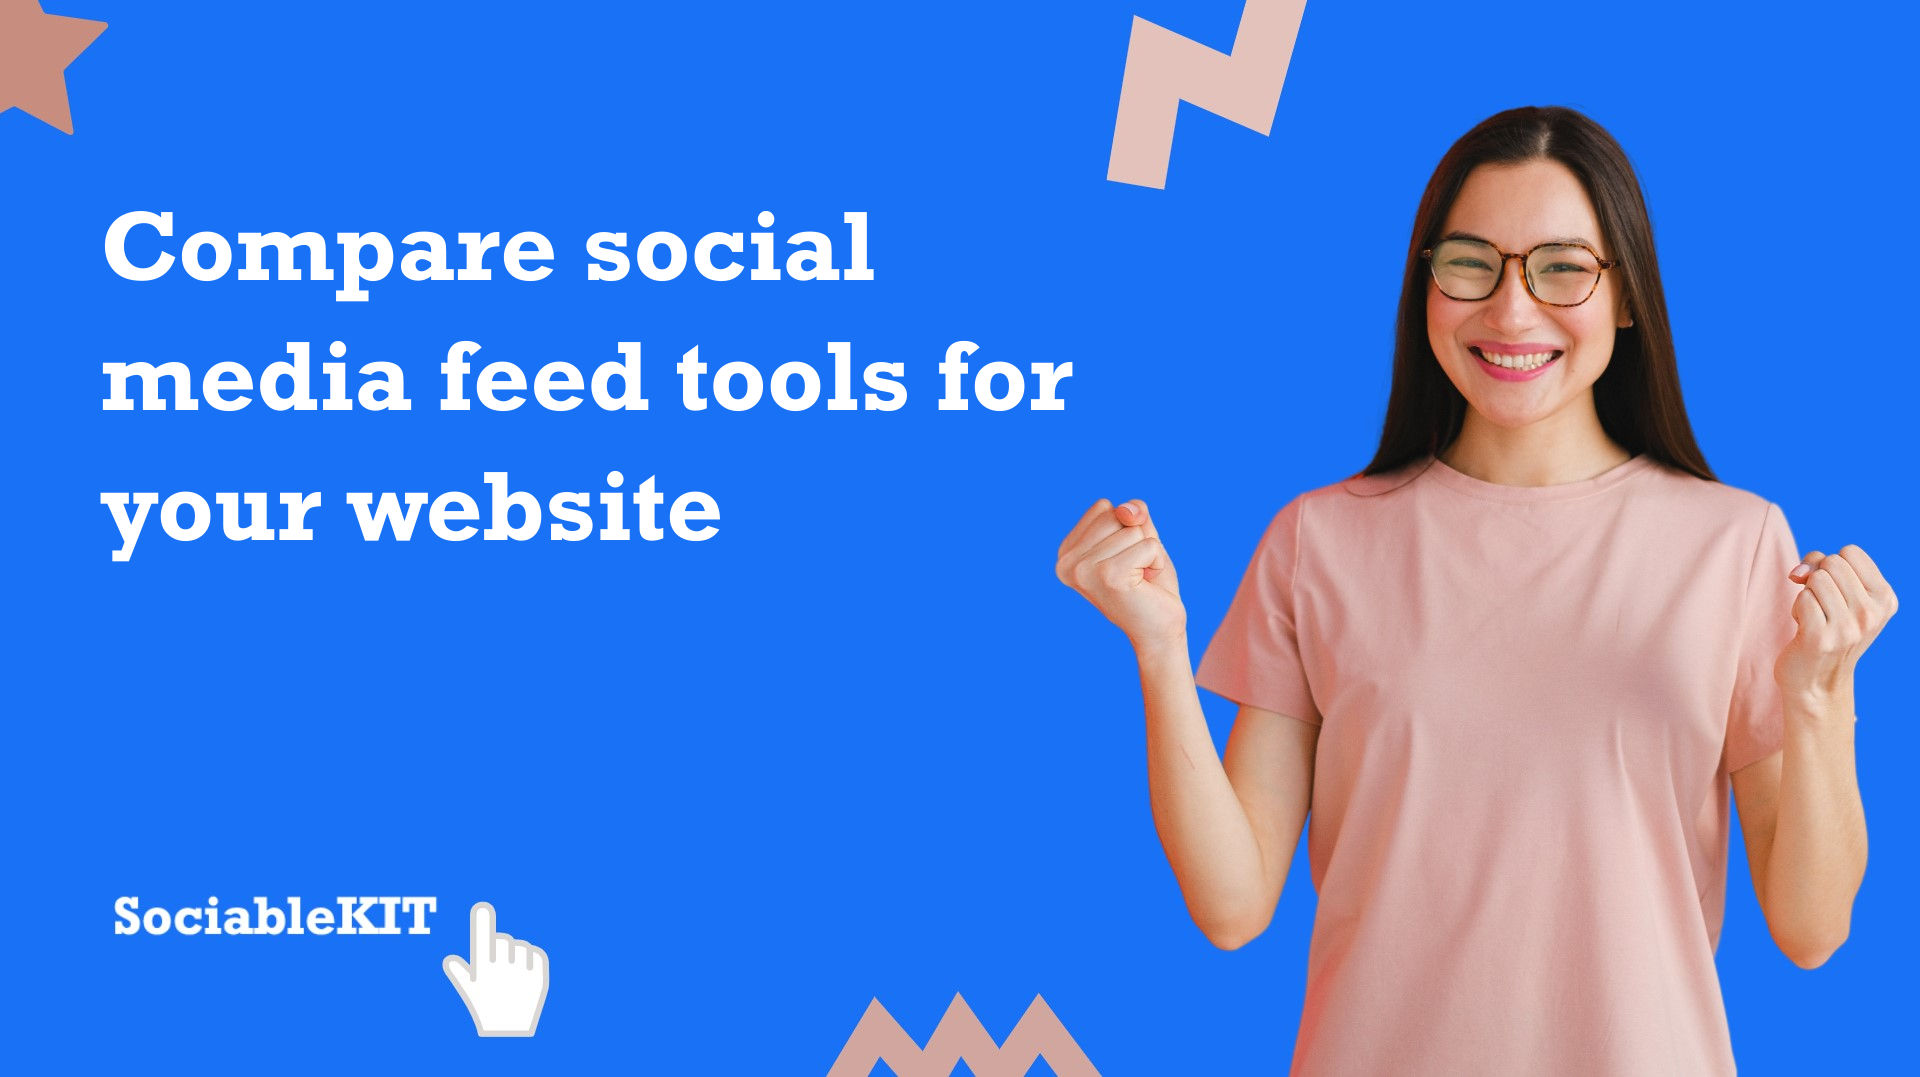 Compare different social media feed tools. Search and select your tool below.